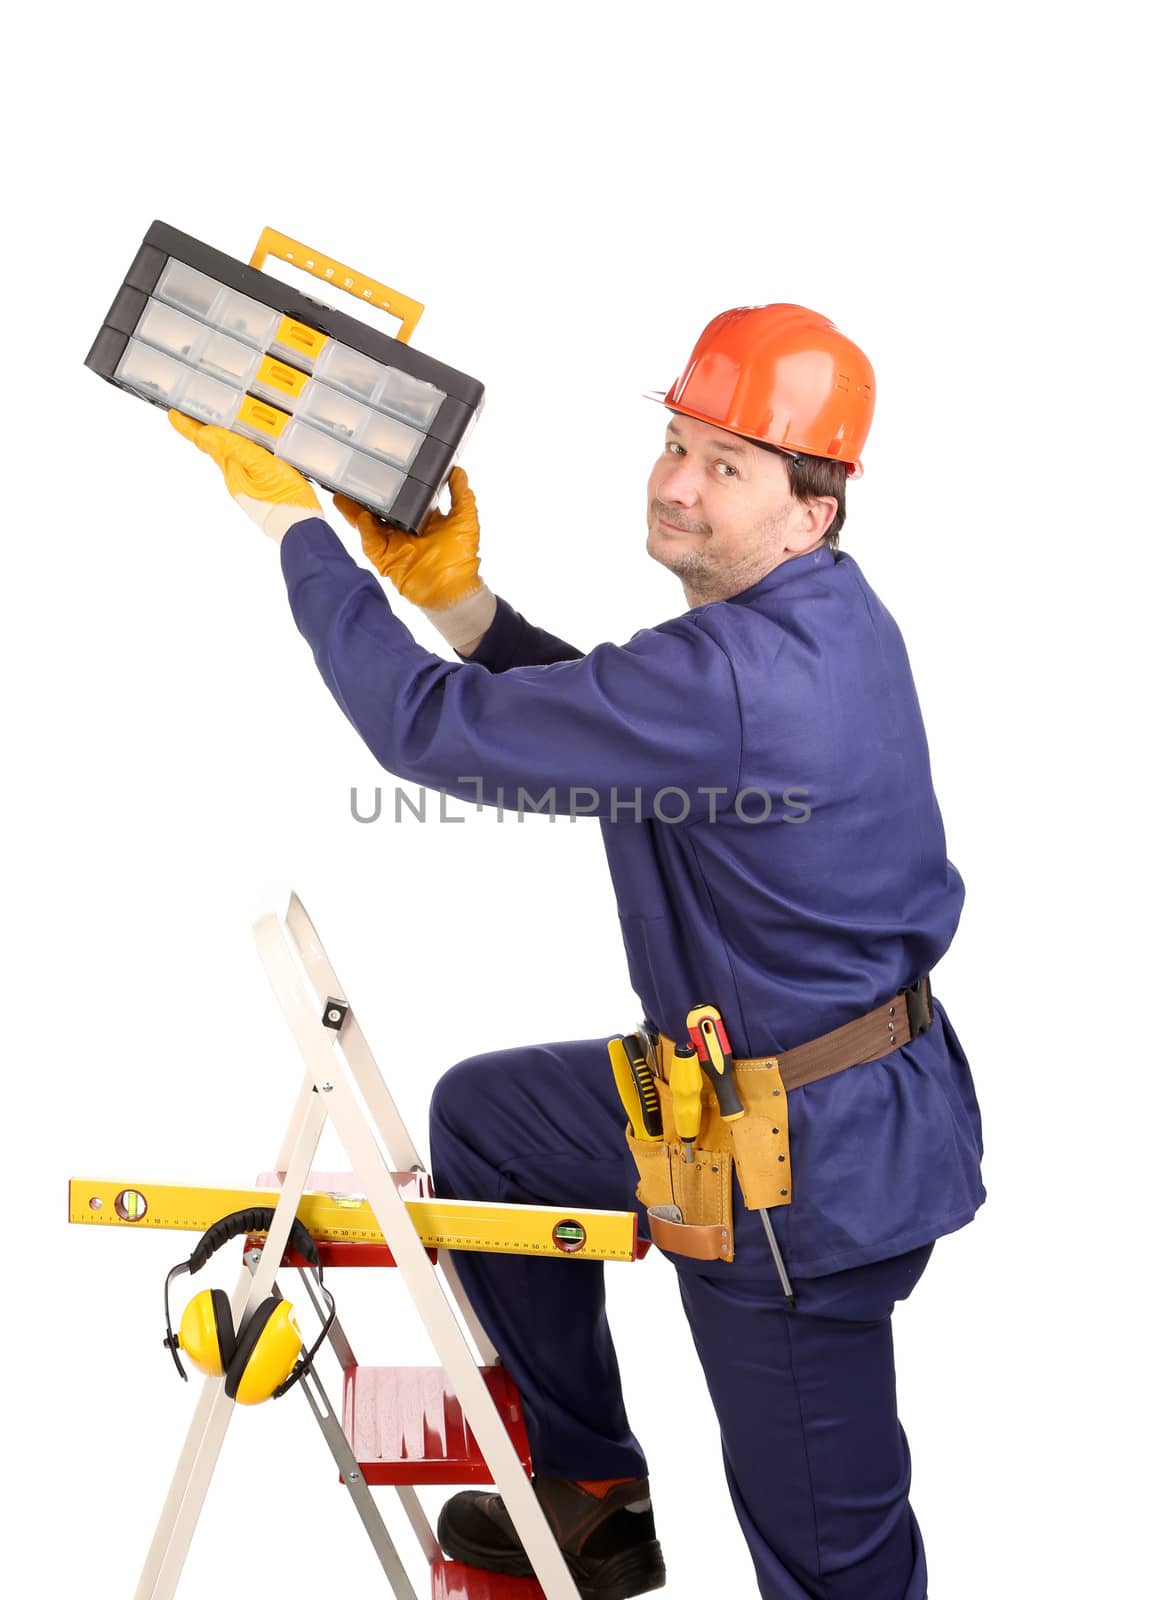 Worker on ladder with hammer. Worker on ladder with toolbox. Isolated on a white background.